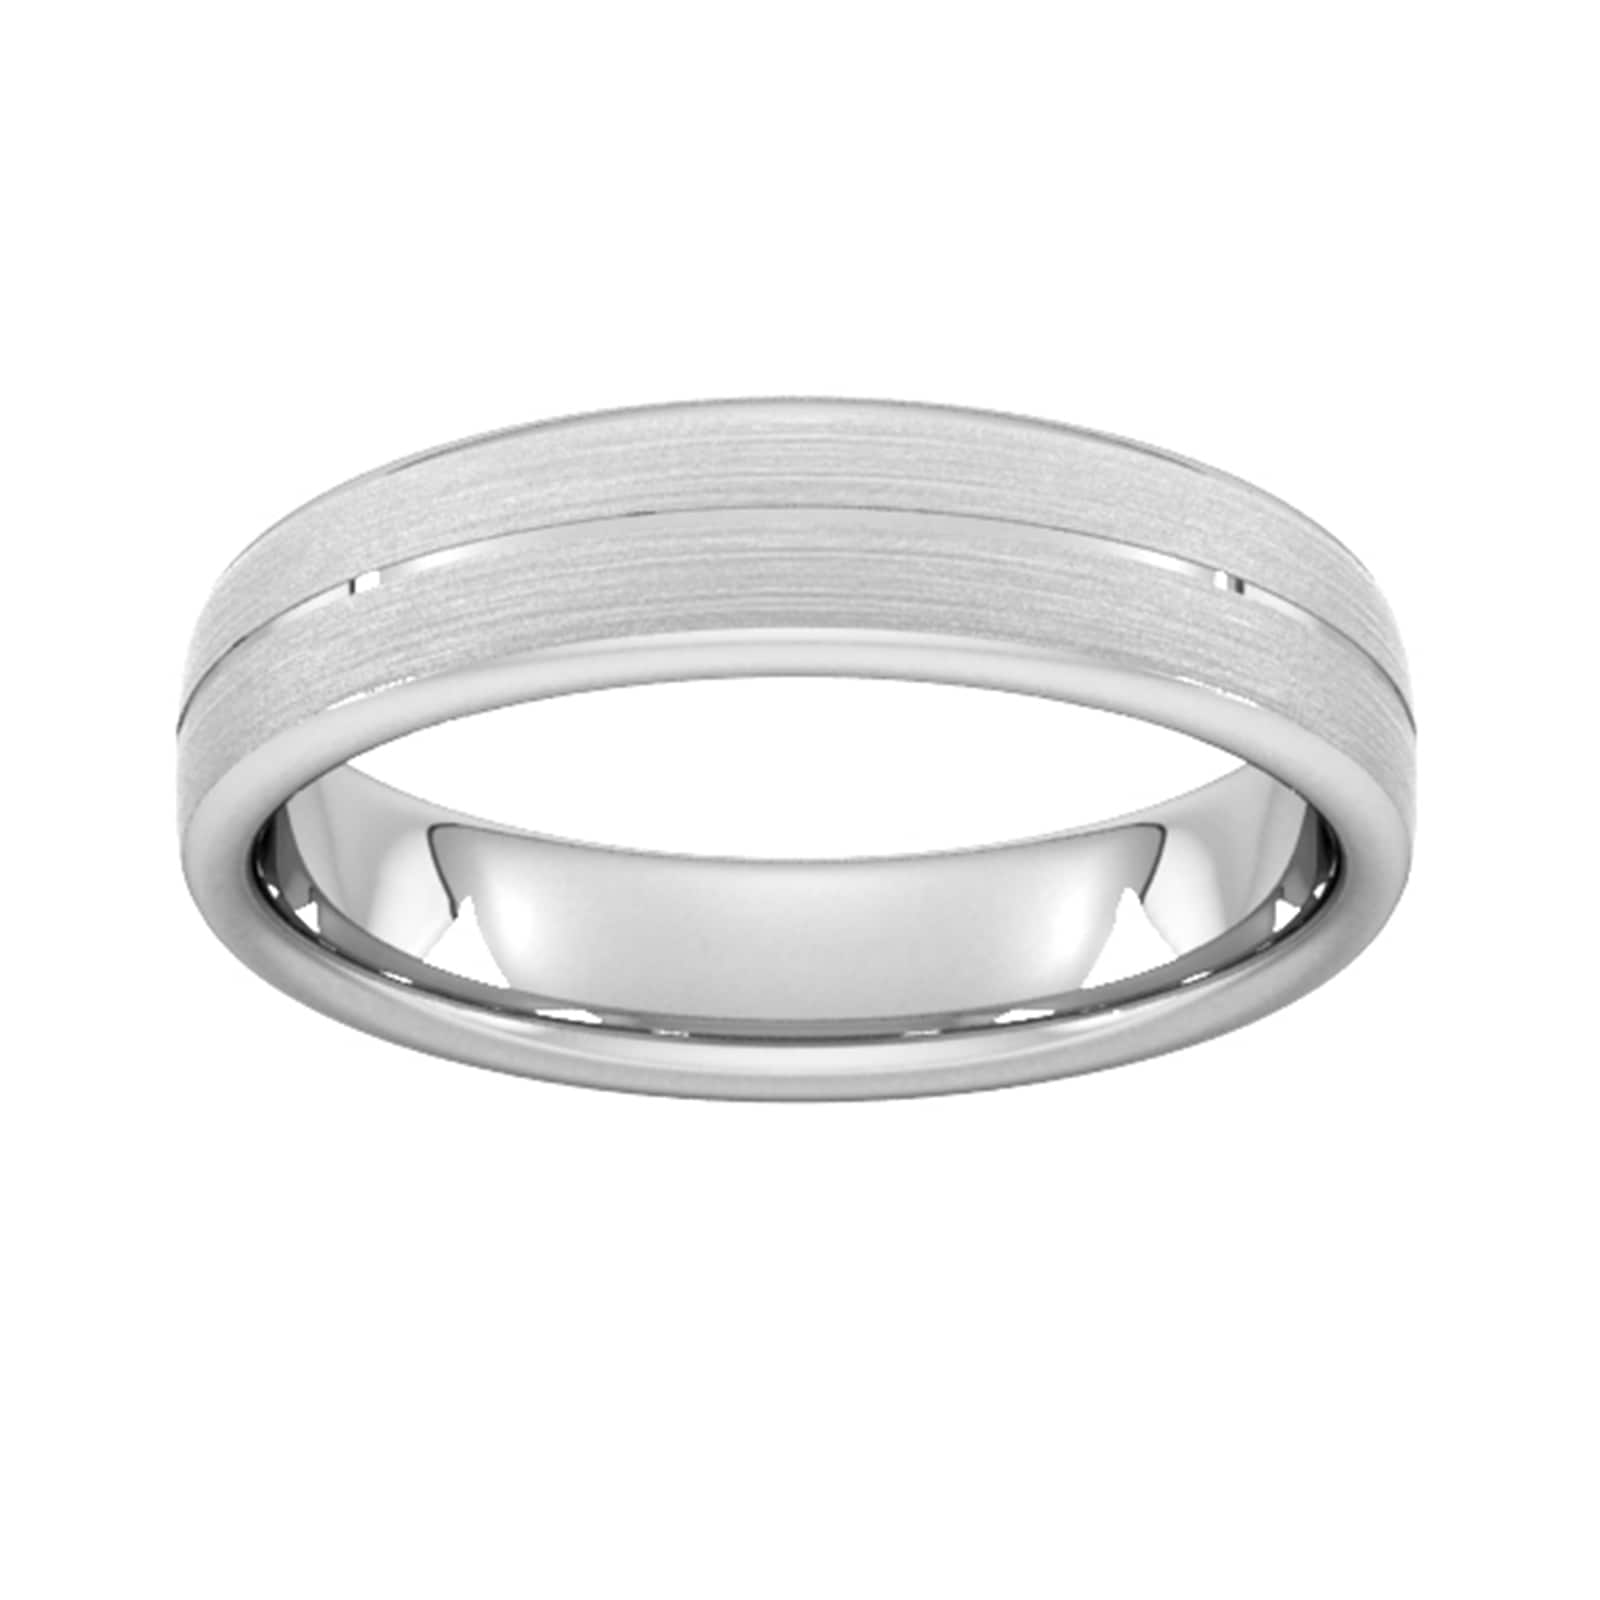 5mm Slight Court Heavy Centre Groove With Chamfered Edge Wedding Ring In 9 Carat White Gold - Ring Size S